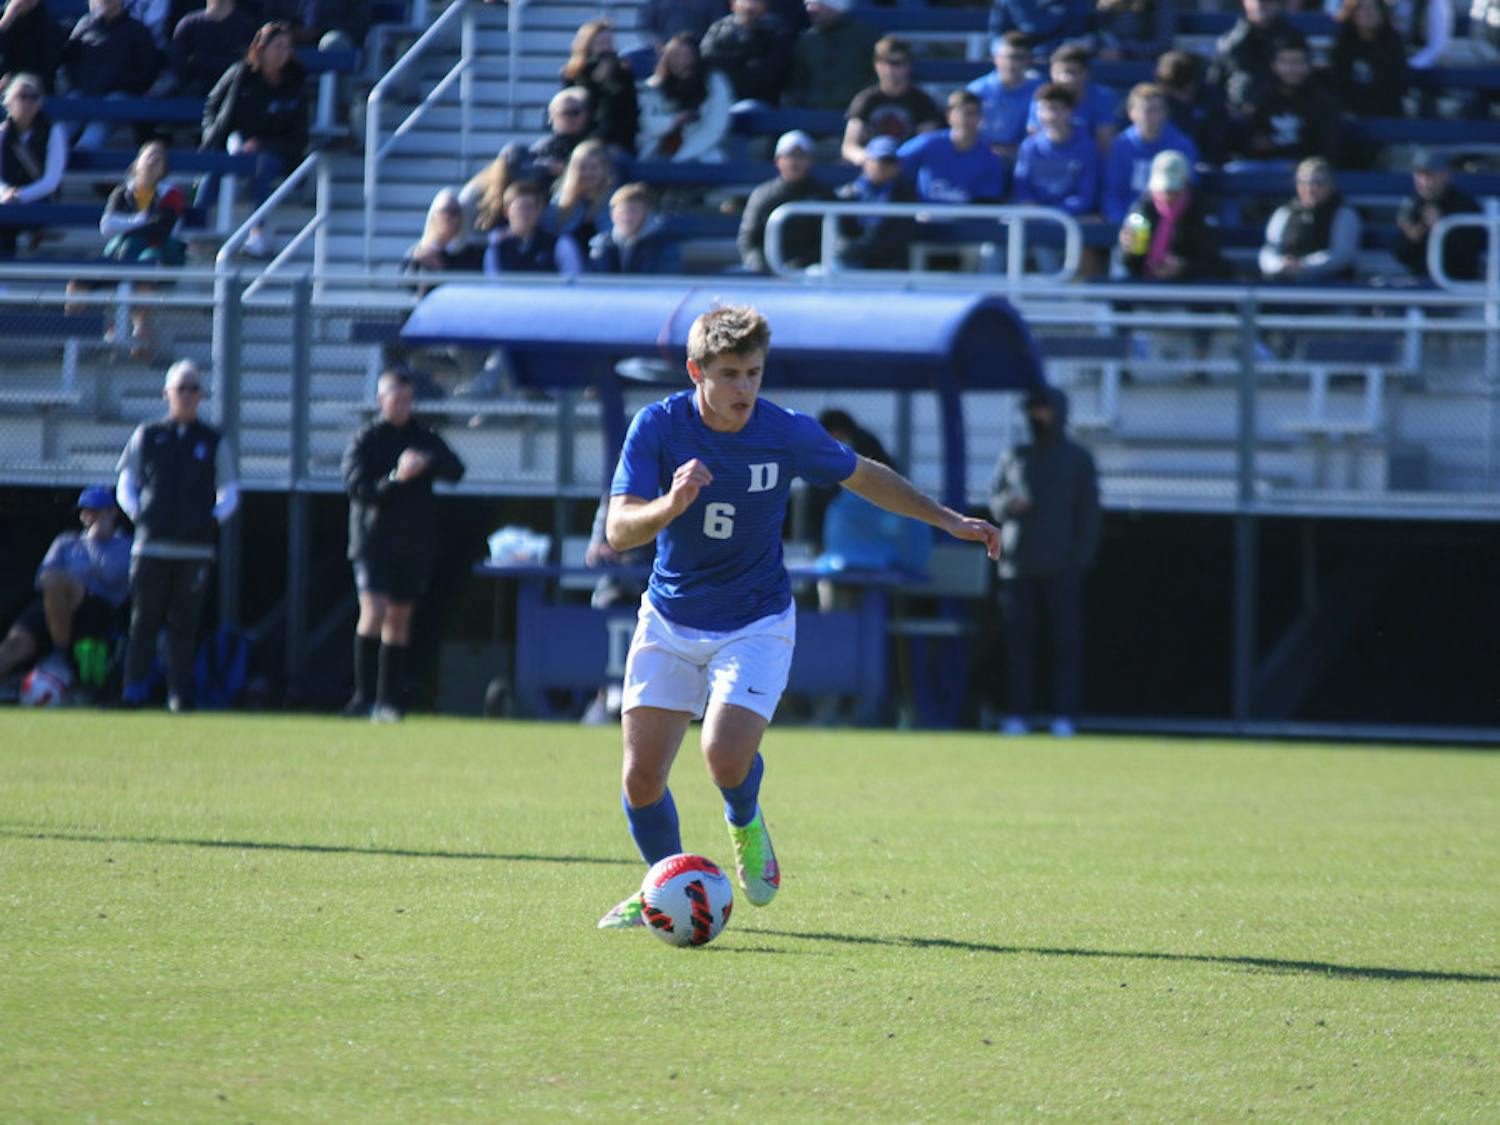 Junior Cameron Kerr recorded two assists against Wake Forest.